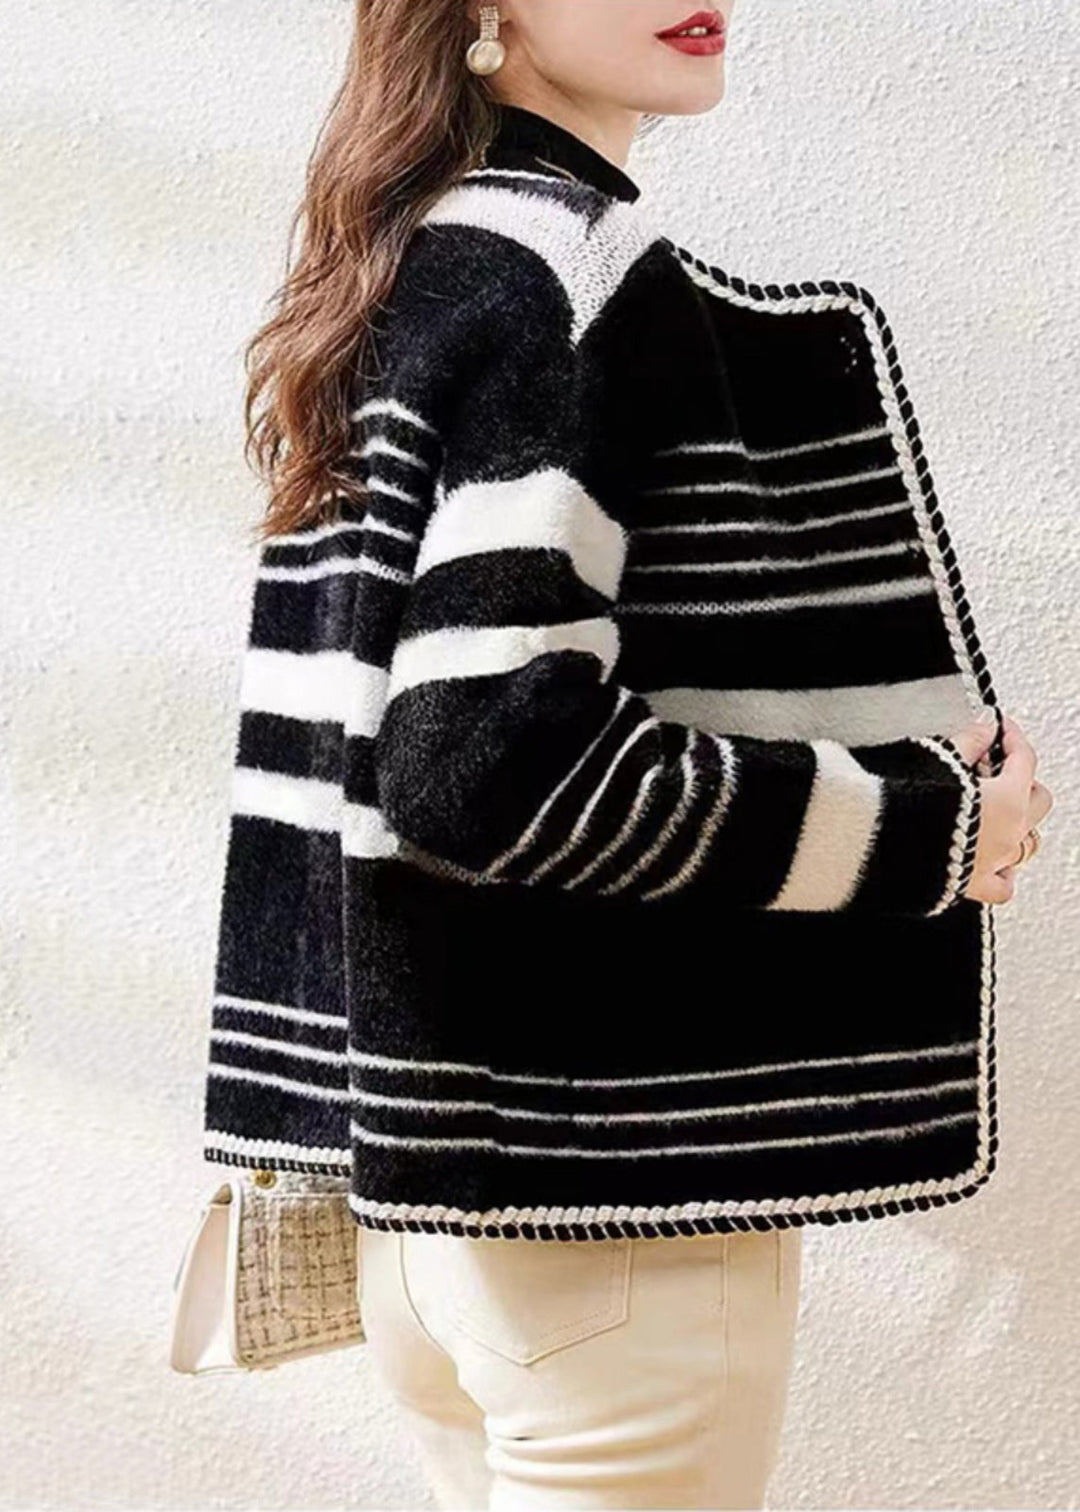 French Black O Neck Striped Women Mink Hair Knitted Coat Fall